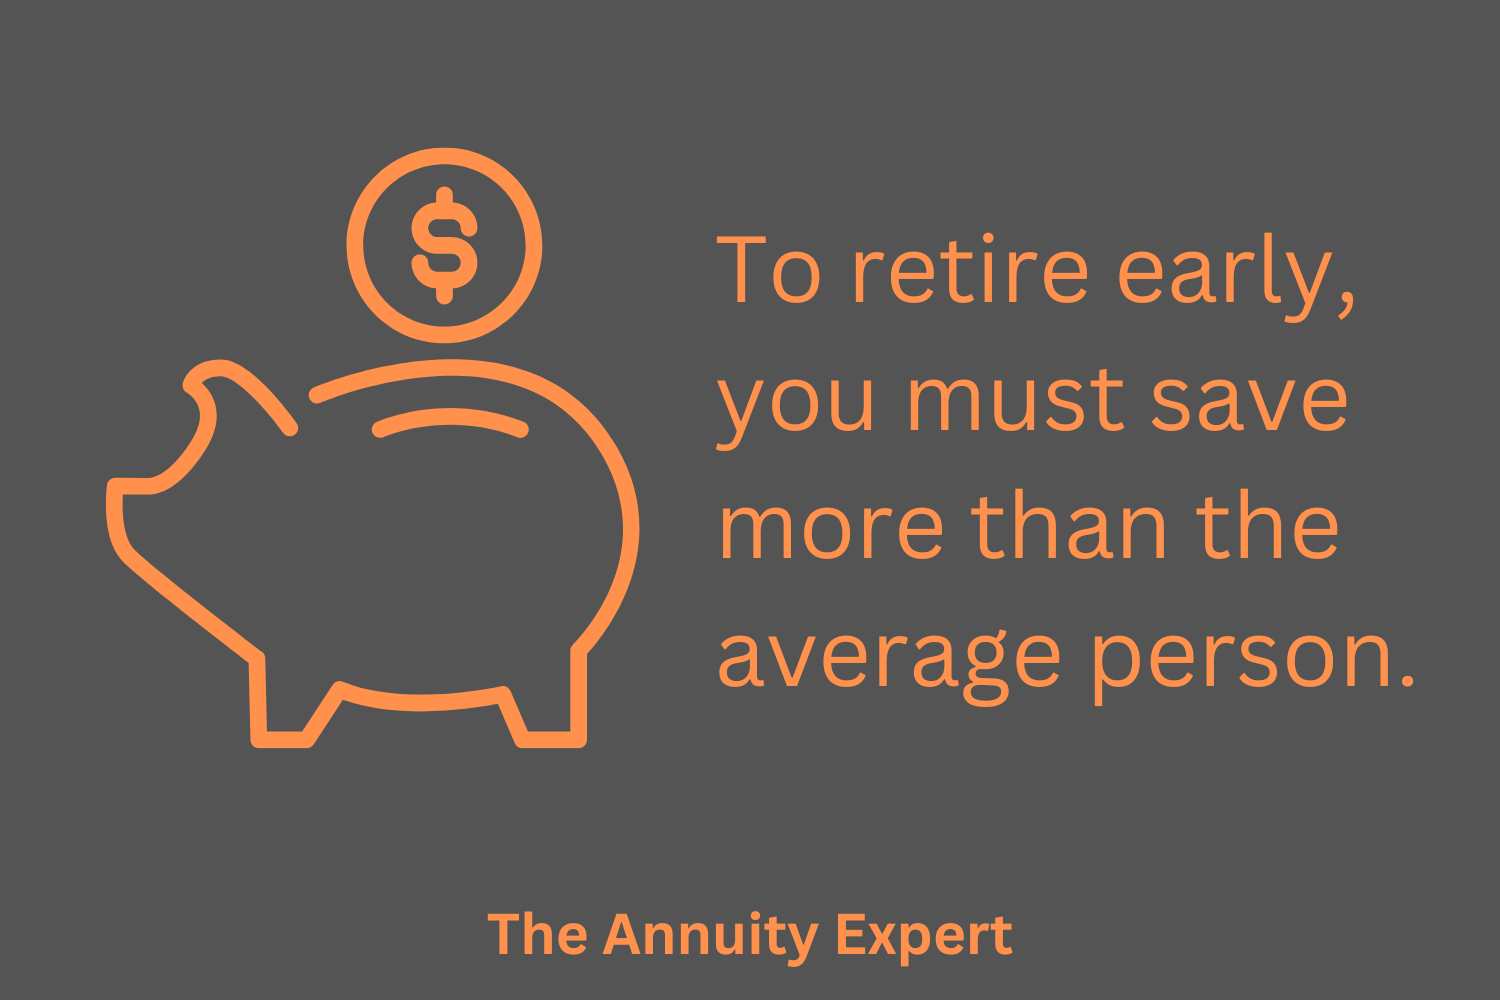 How Much Do I Need In Retirement Savings For Early Retirement?